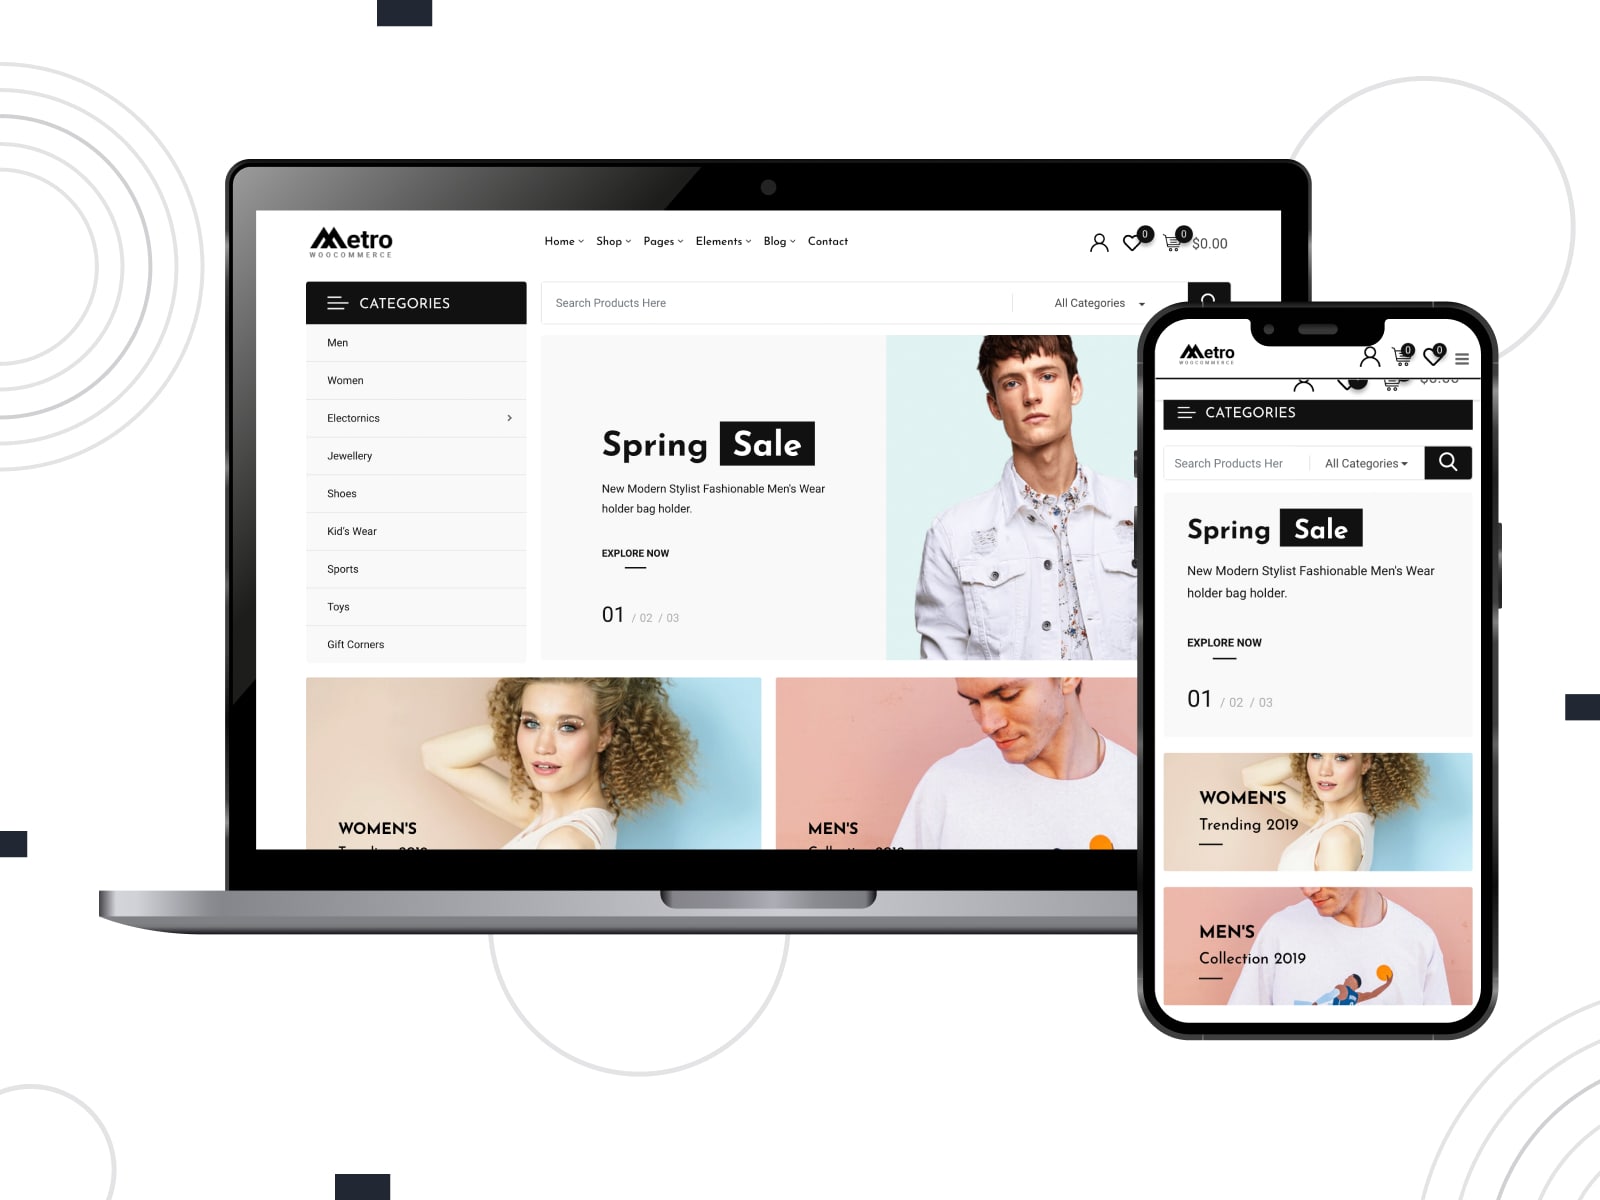 Illustration of Metro, one of the best premium WordPress eCommerce themes with 6+ unique header variations.